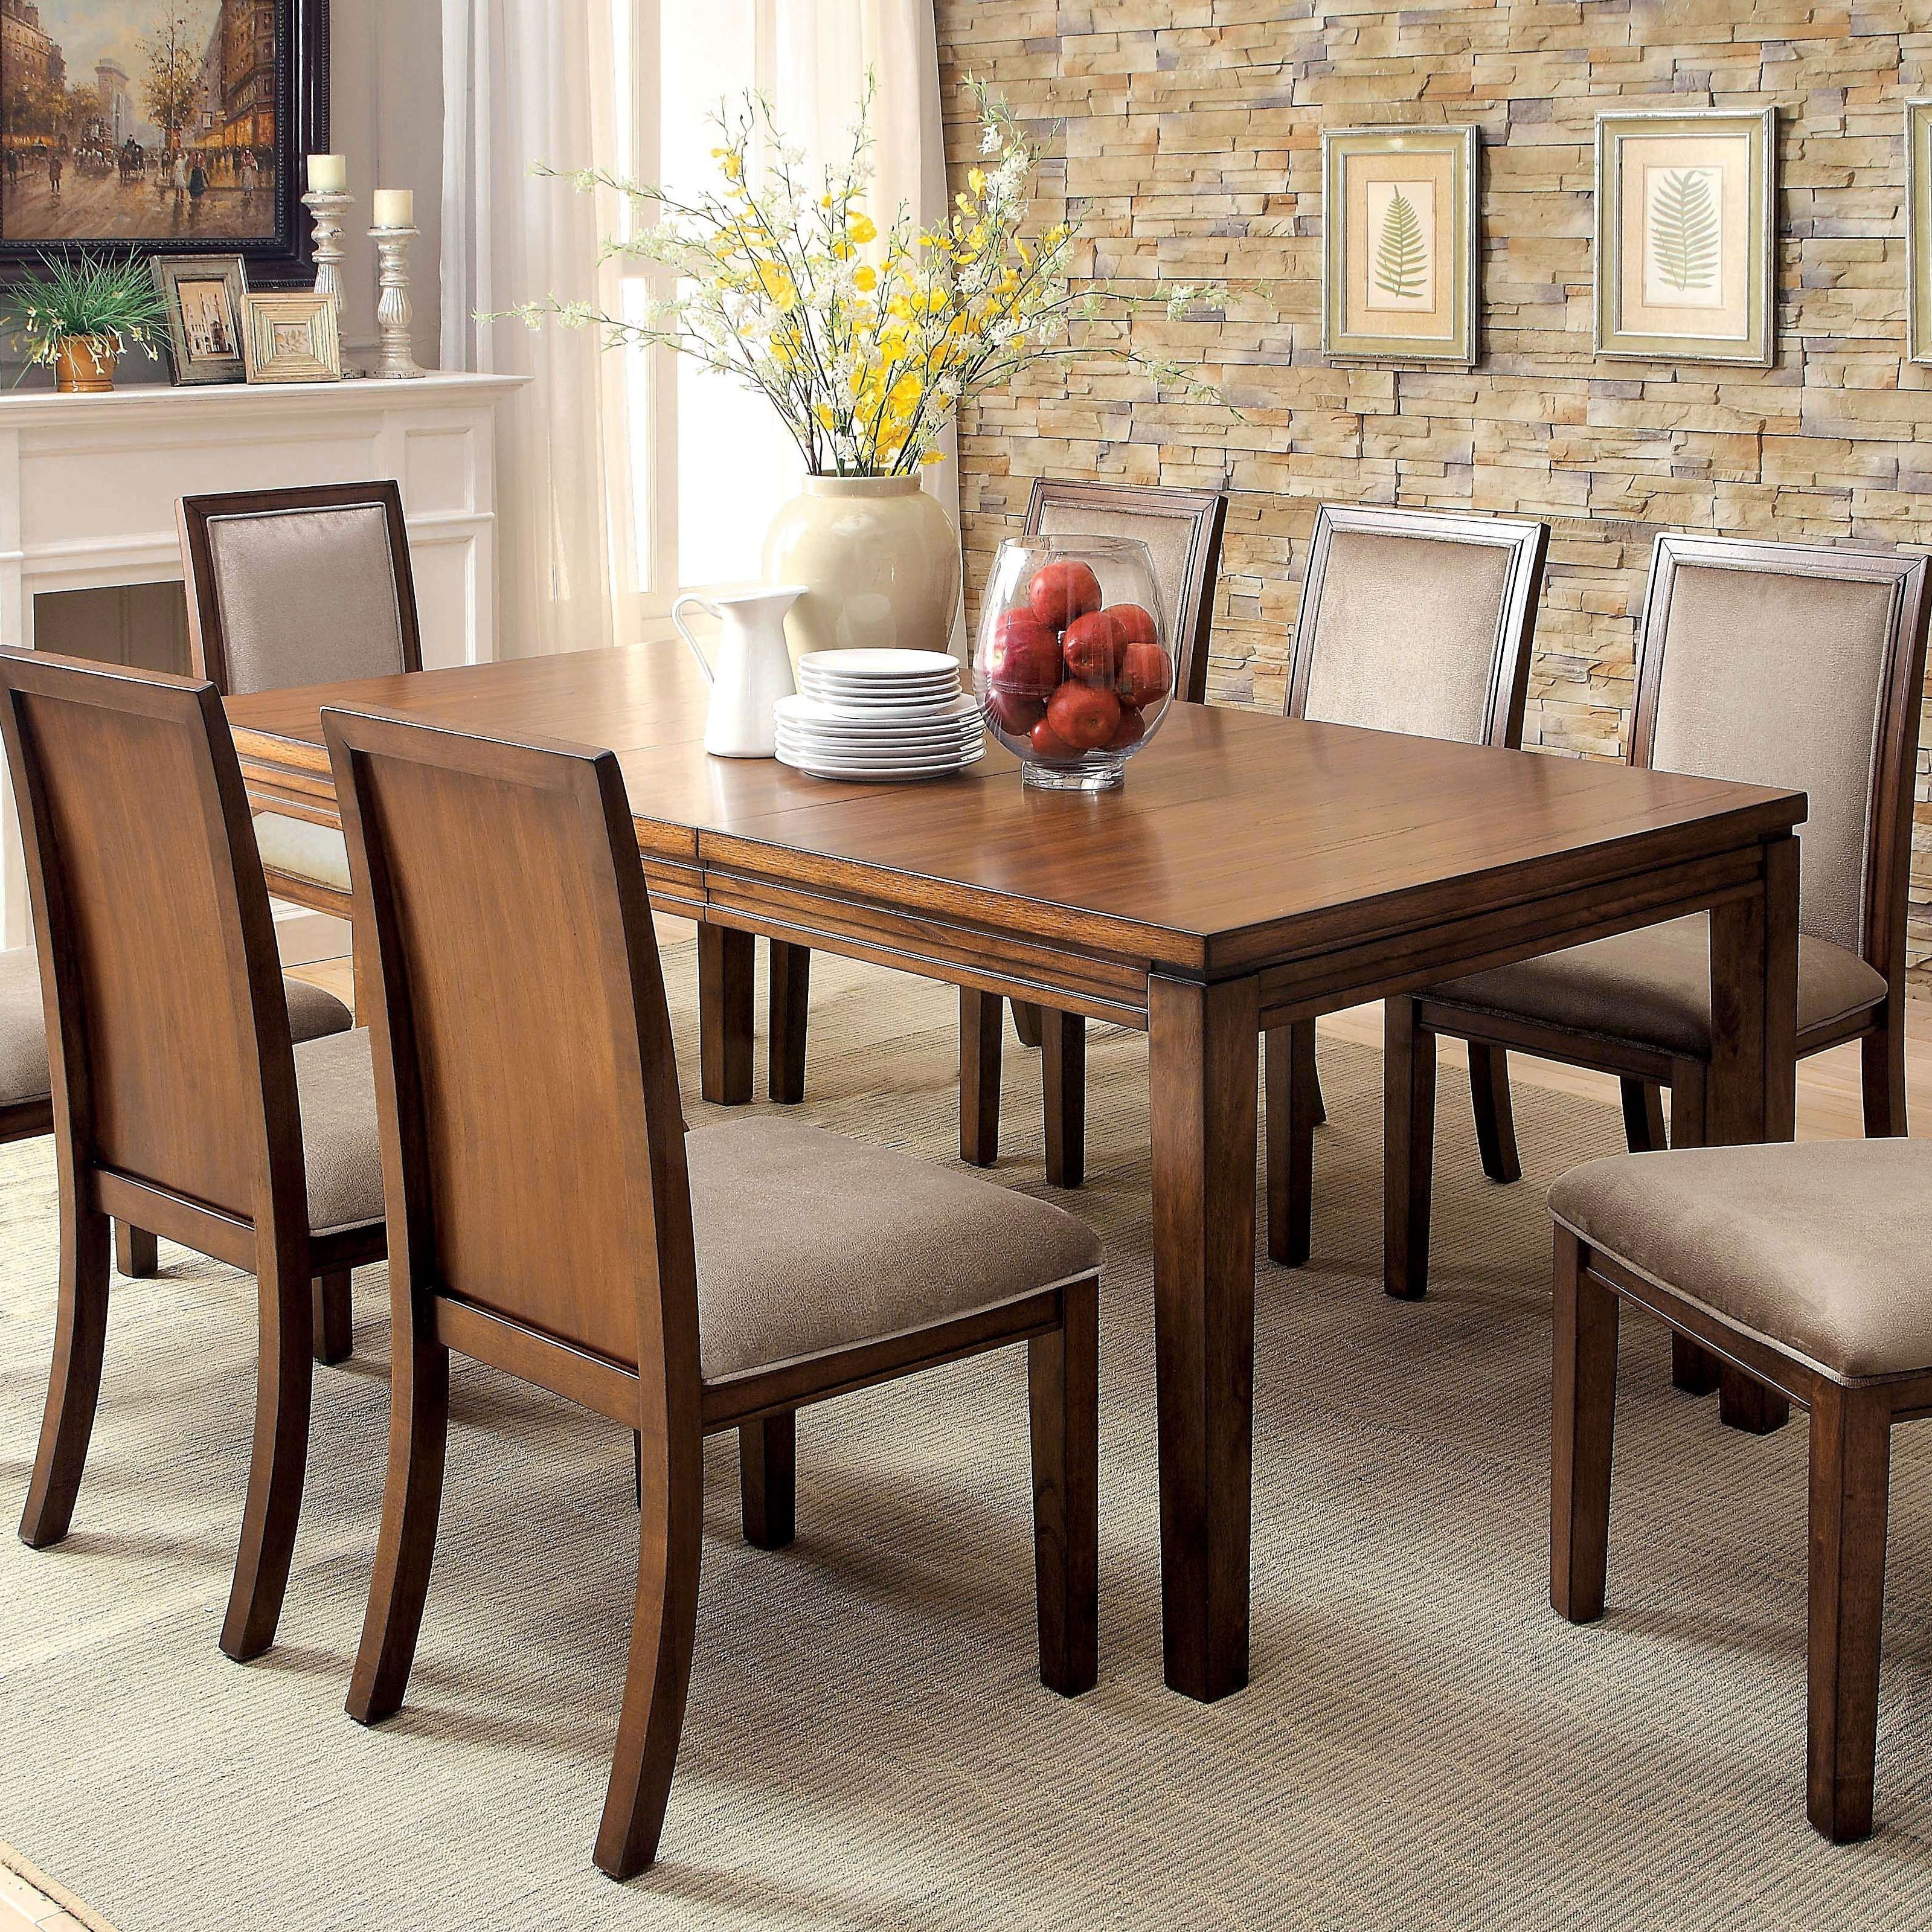 2018 Kingston Dining Tables And Chairs Inside Kingston Dining Room Table Elegant Furniture Of America Berla (Photo 23 of 25)